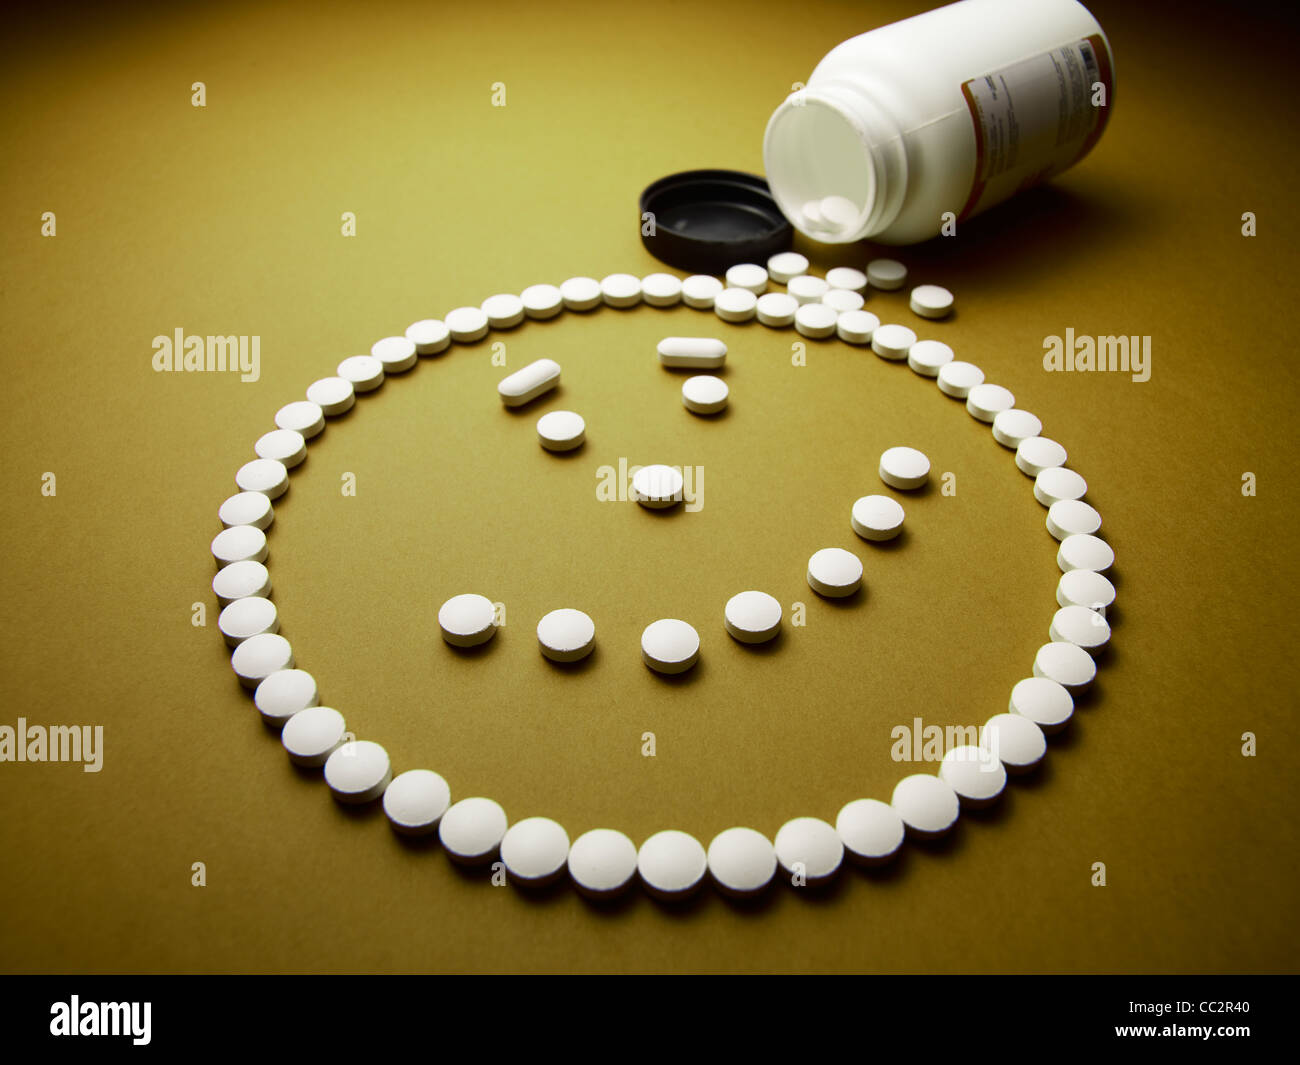 drugged happy face made out of pills and drugs Stock Photo